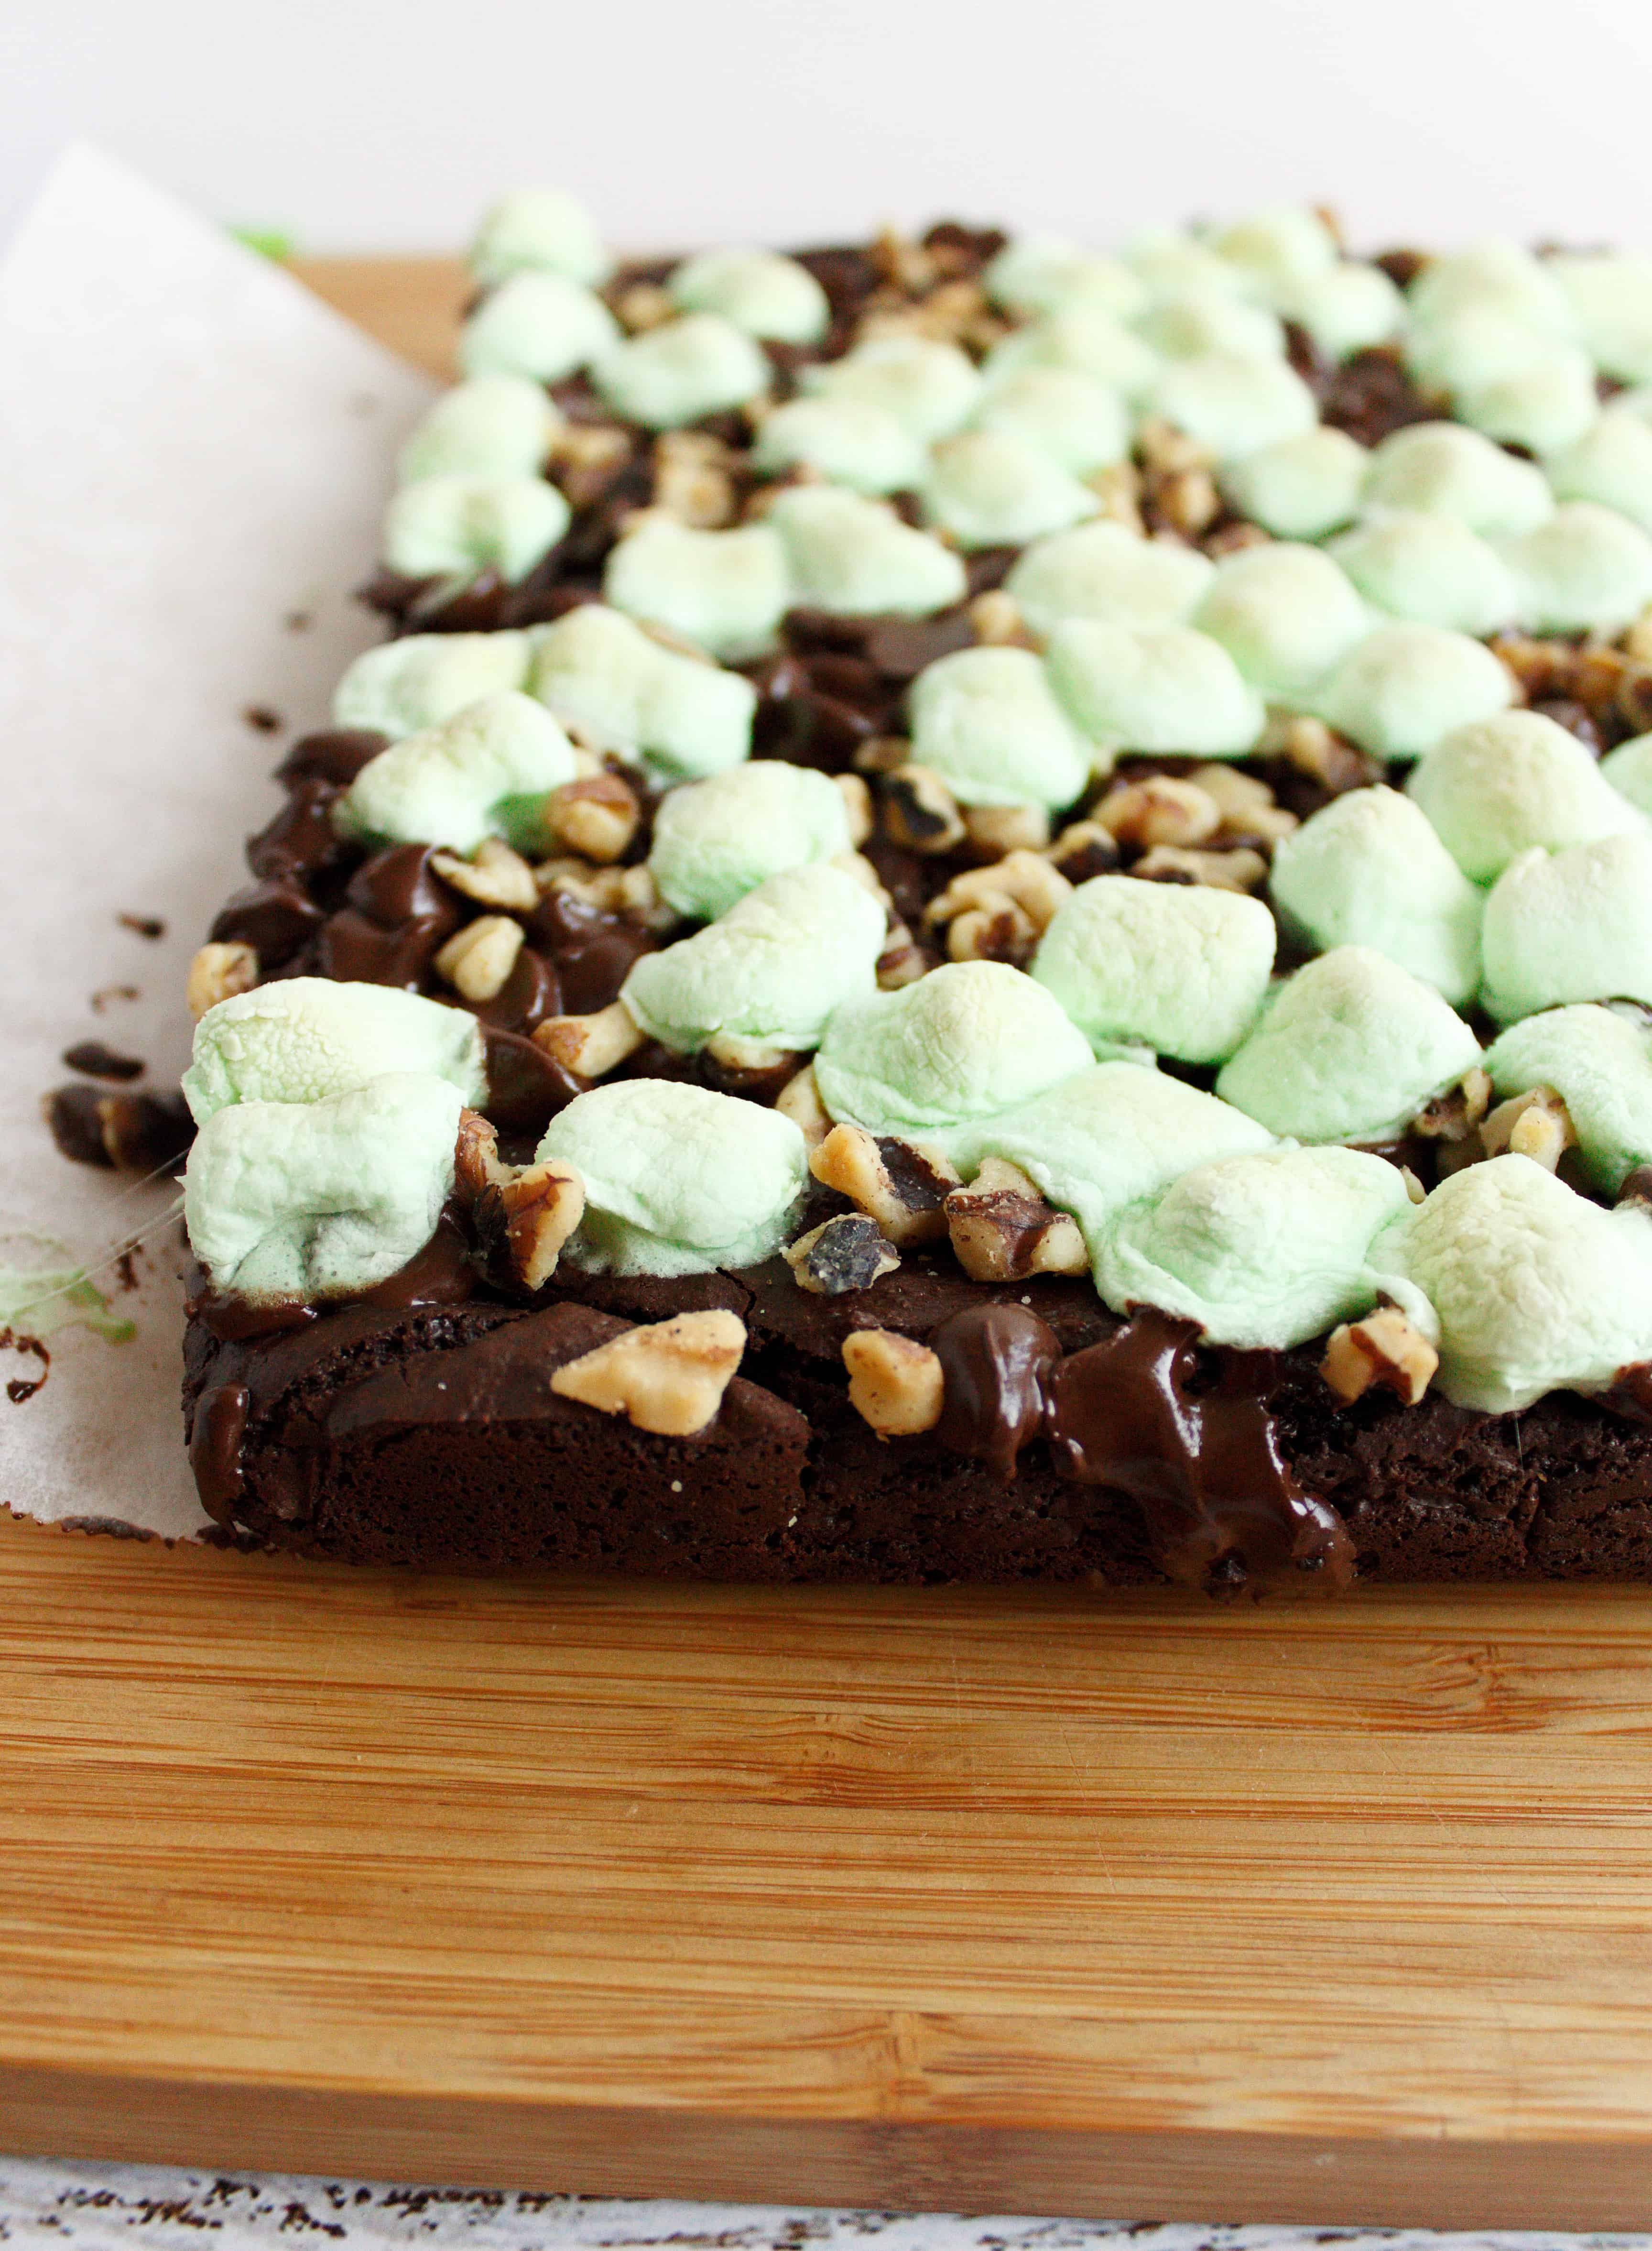 Brownies sit on a wooden cutting board